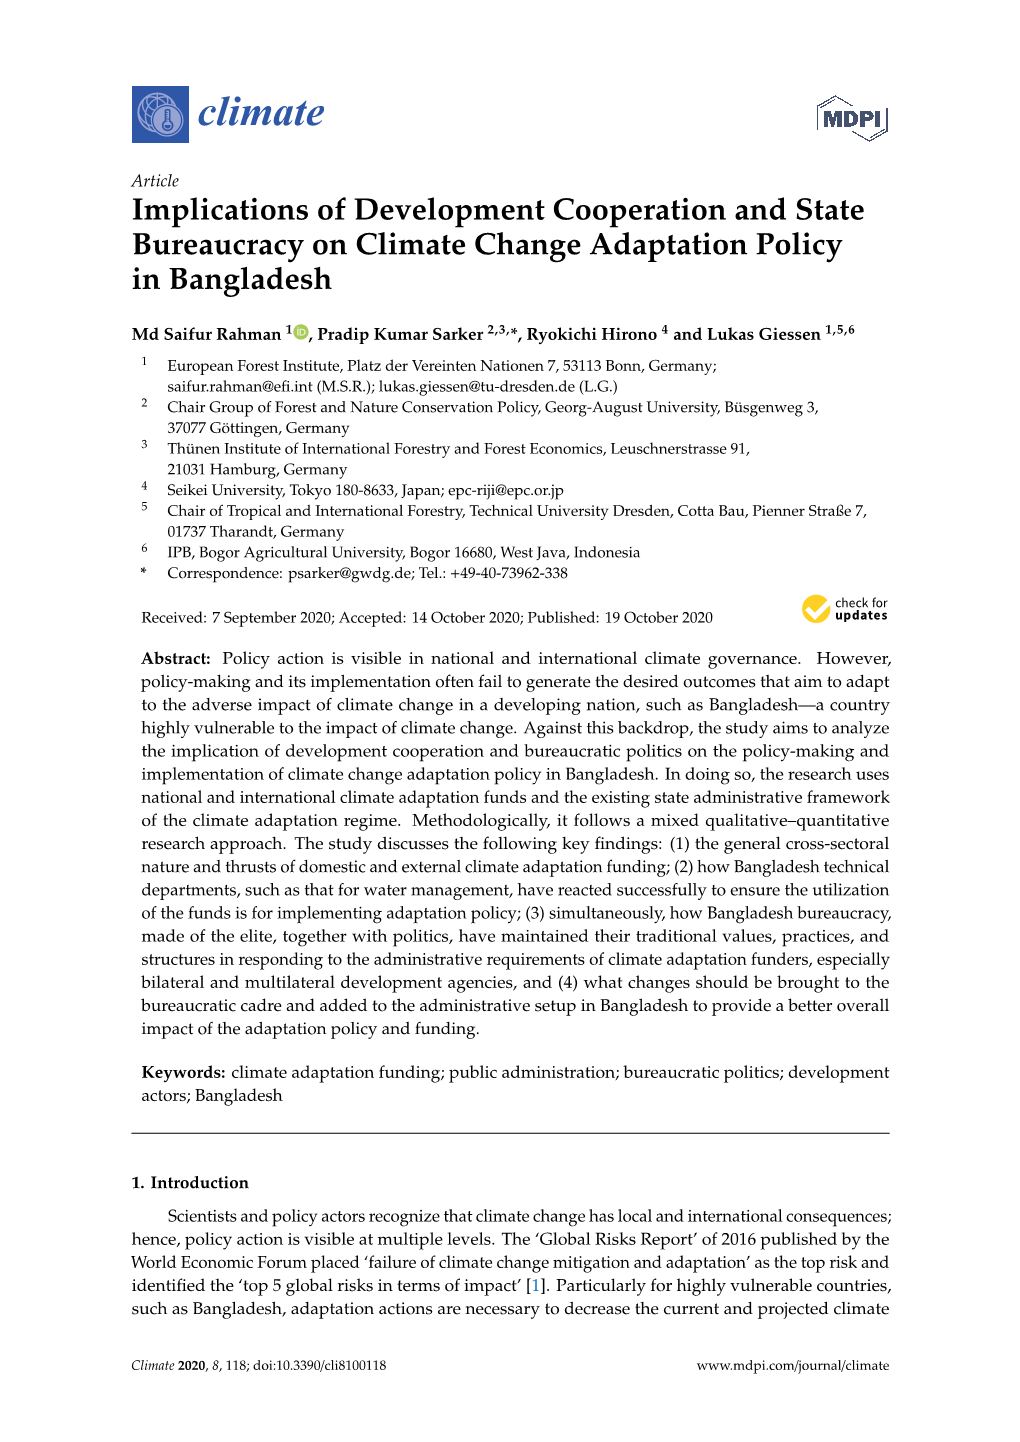 Implications of Development Cooperation and State Bureaucracy on Climate Change Adaptation Policy in Bangladesh